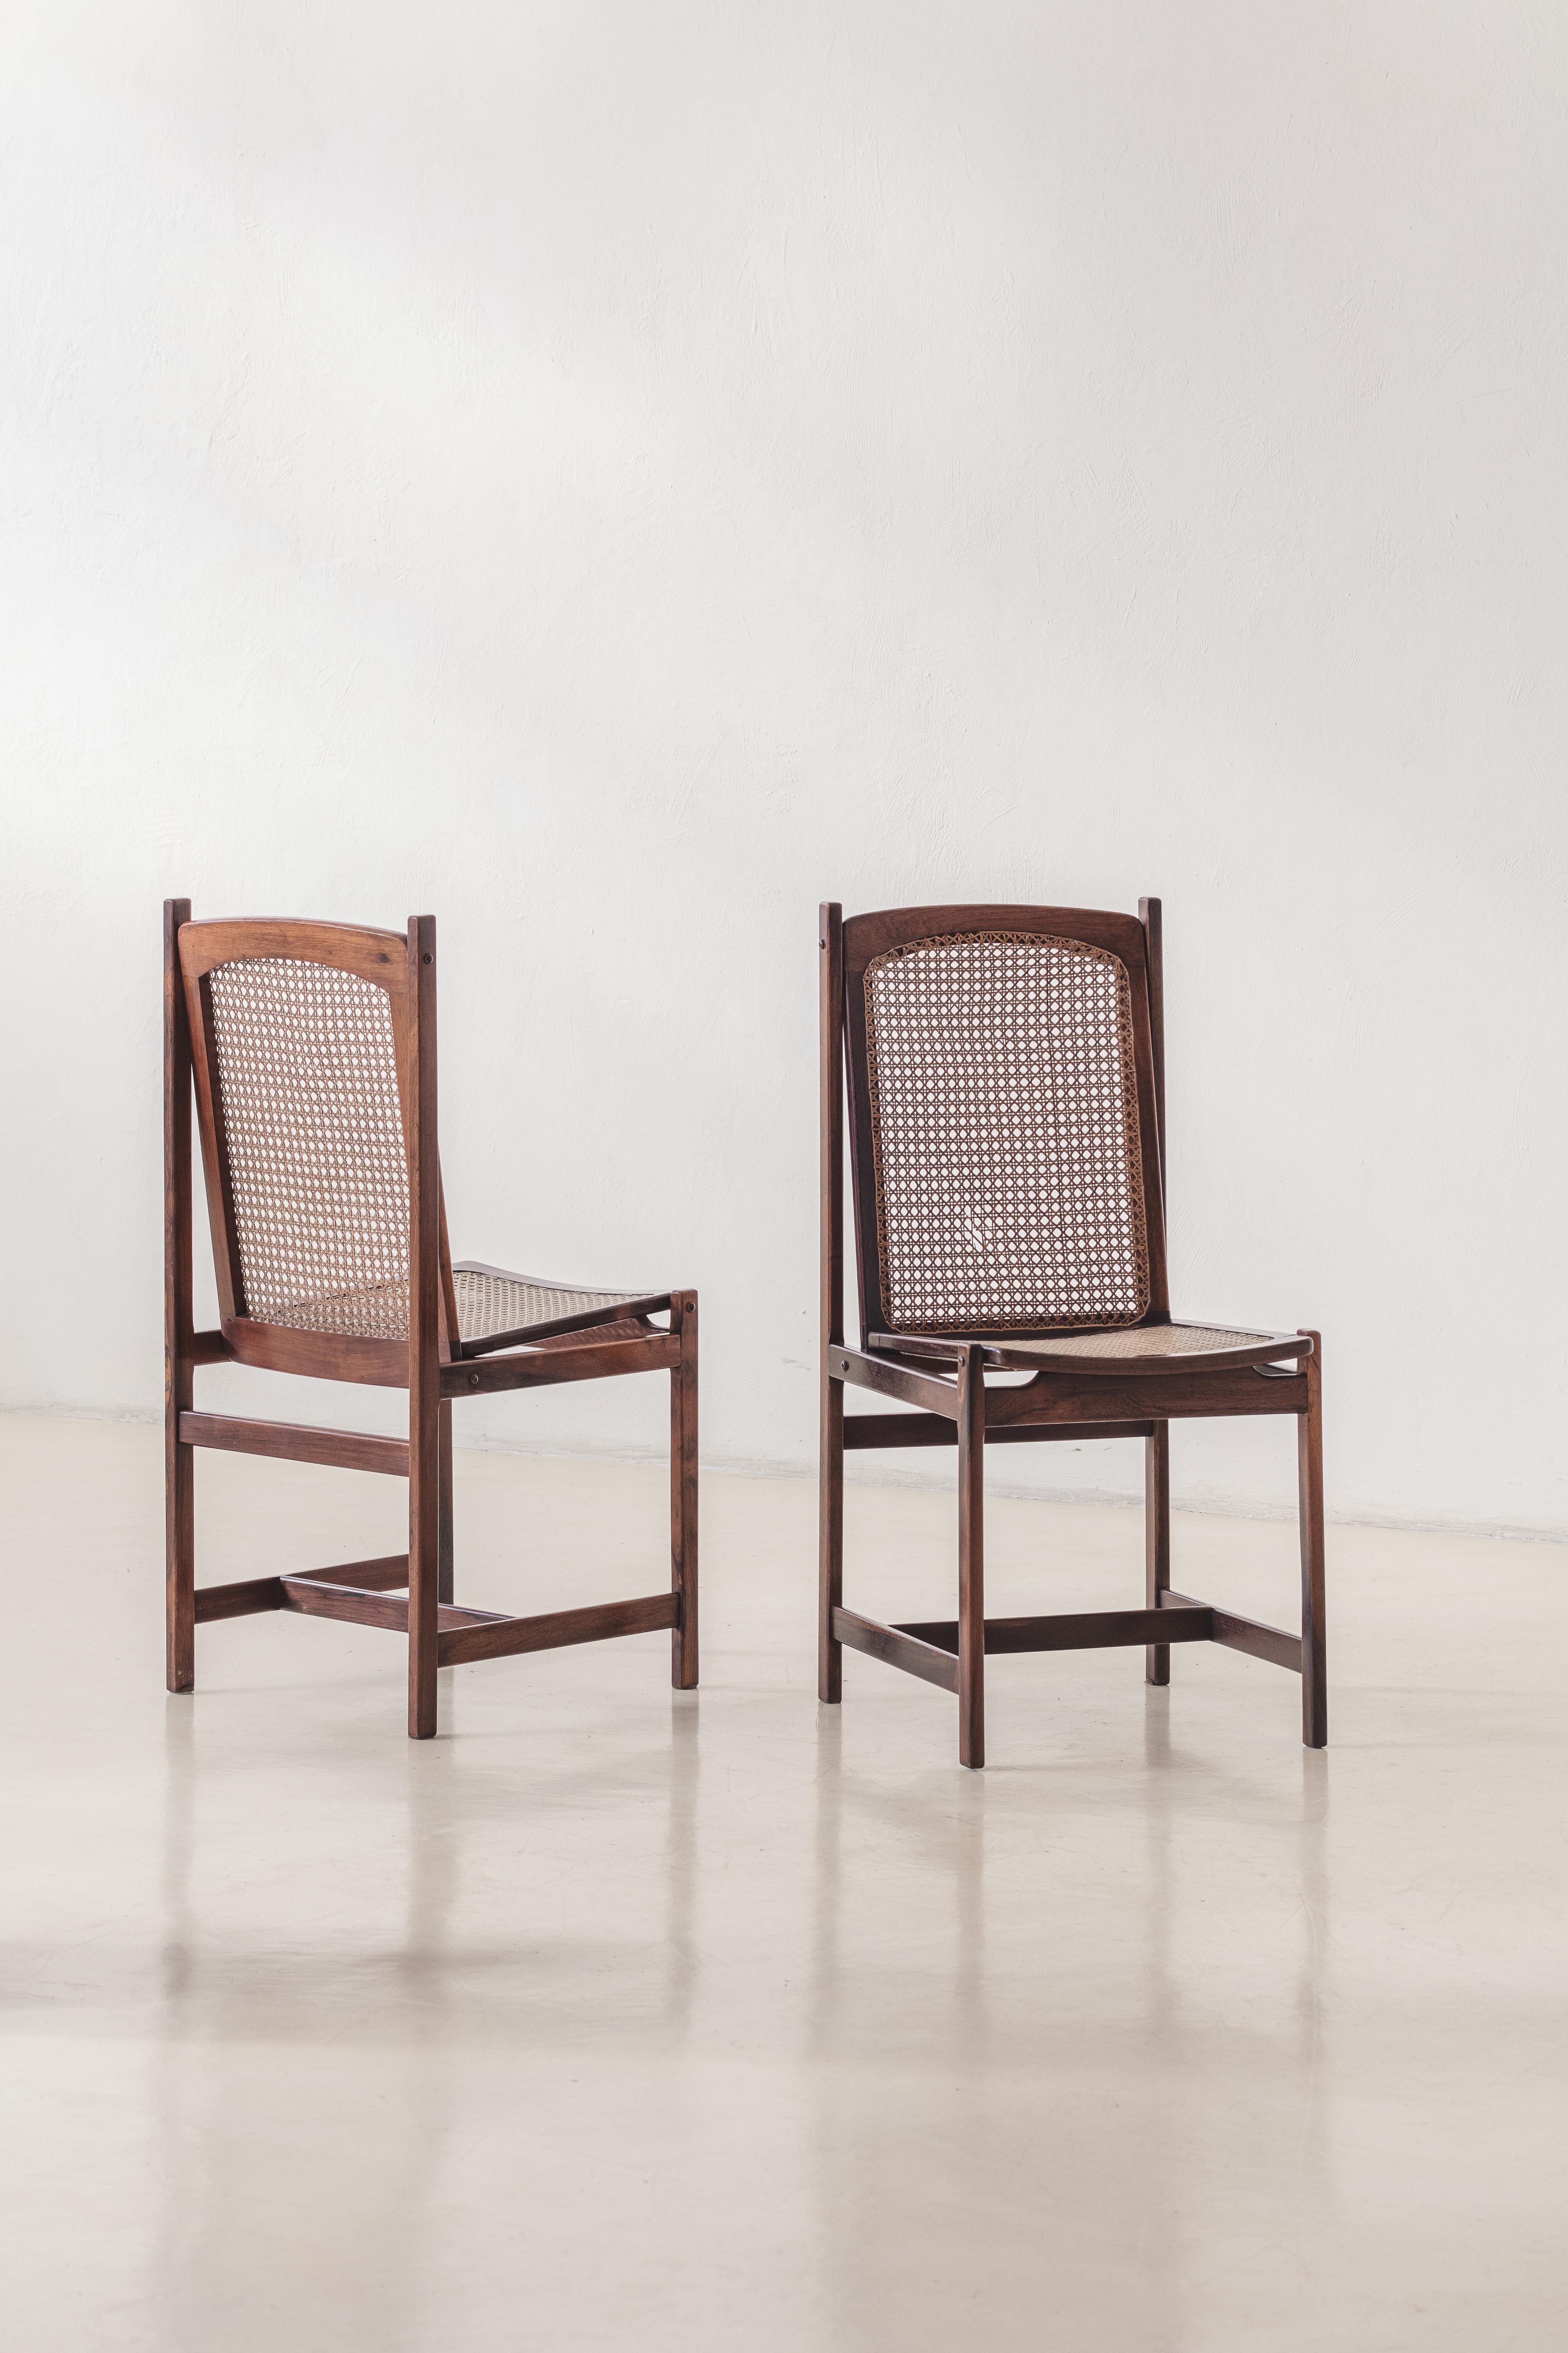 Celina Decorações set of six Dining Chairs, Rosewood and Cane, Mid-Century 1960s en vente 2